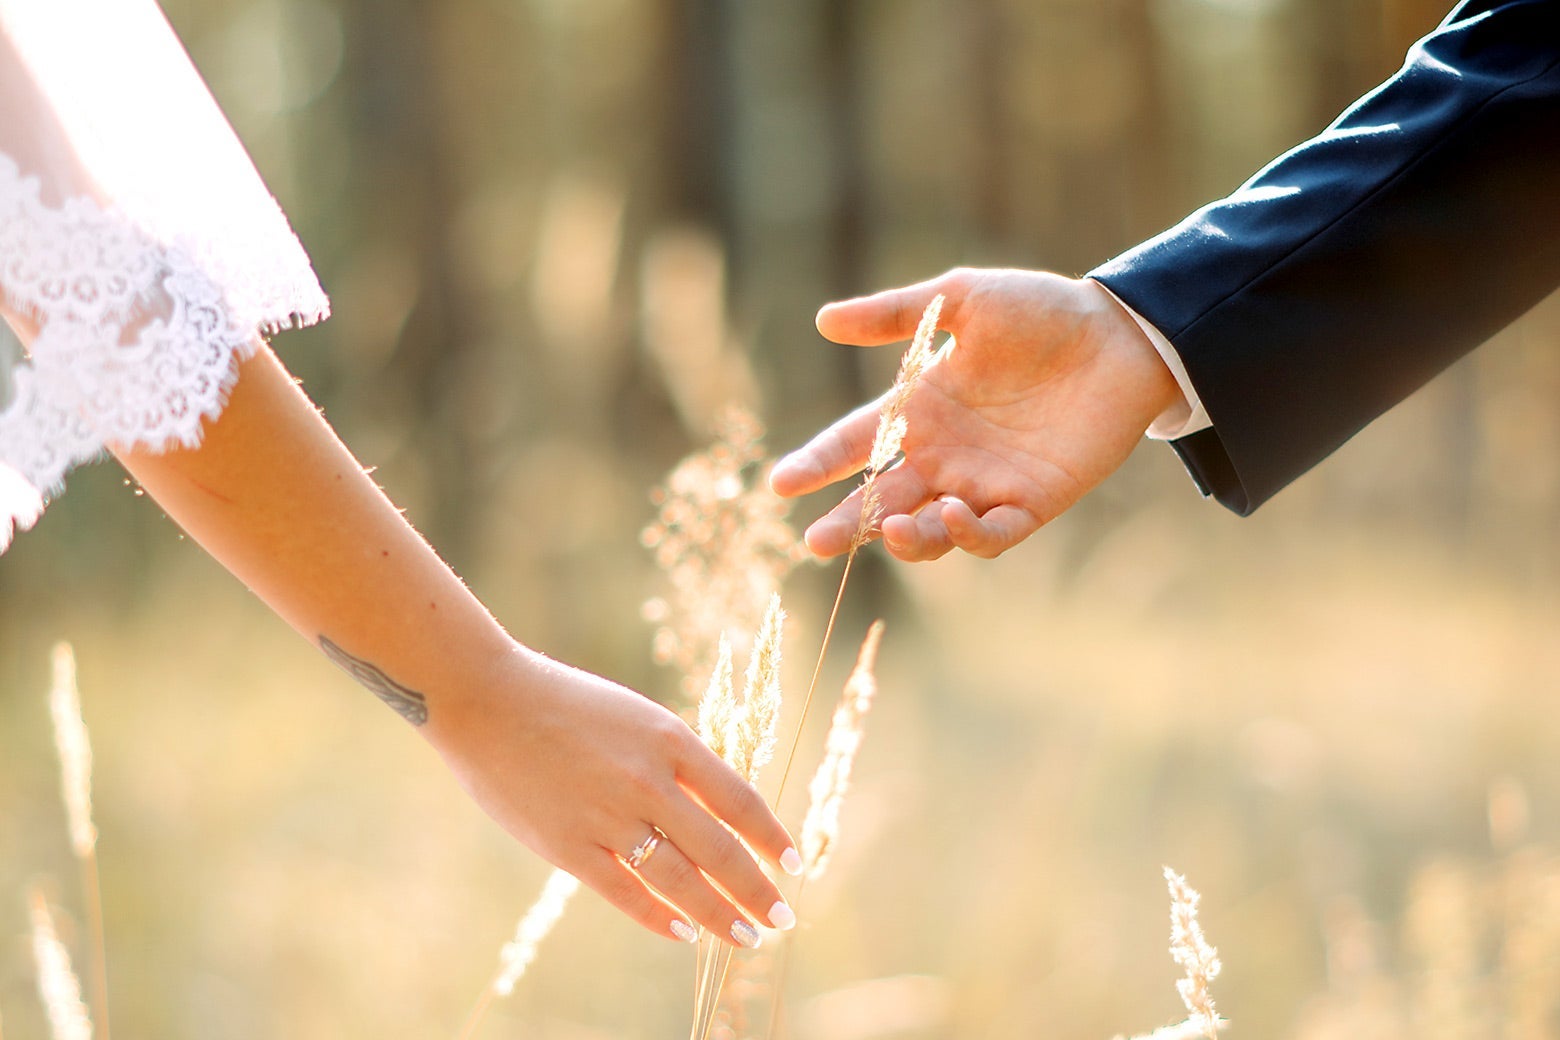 The hands of a bride and groom reach out toward each other in a meadow.